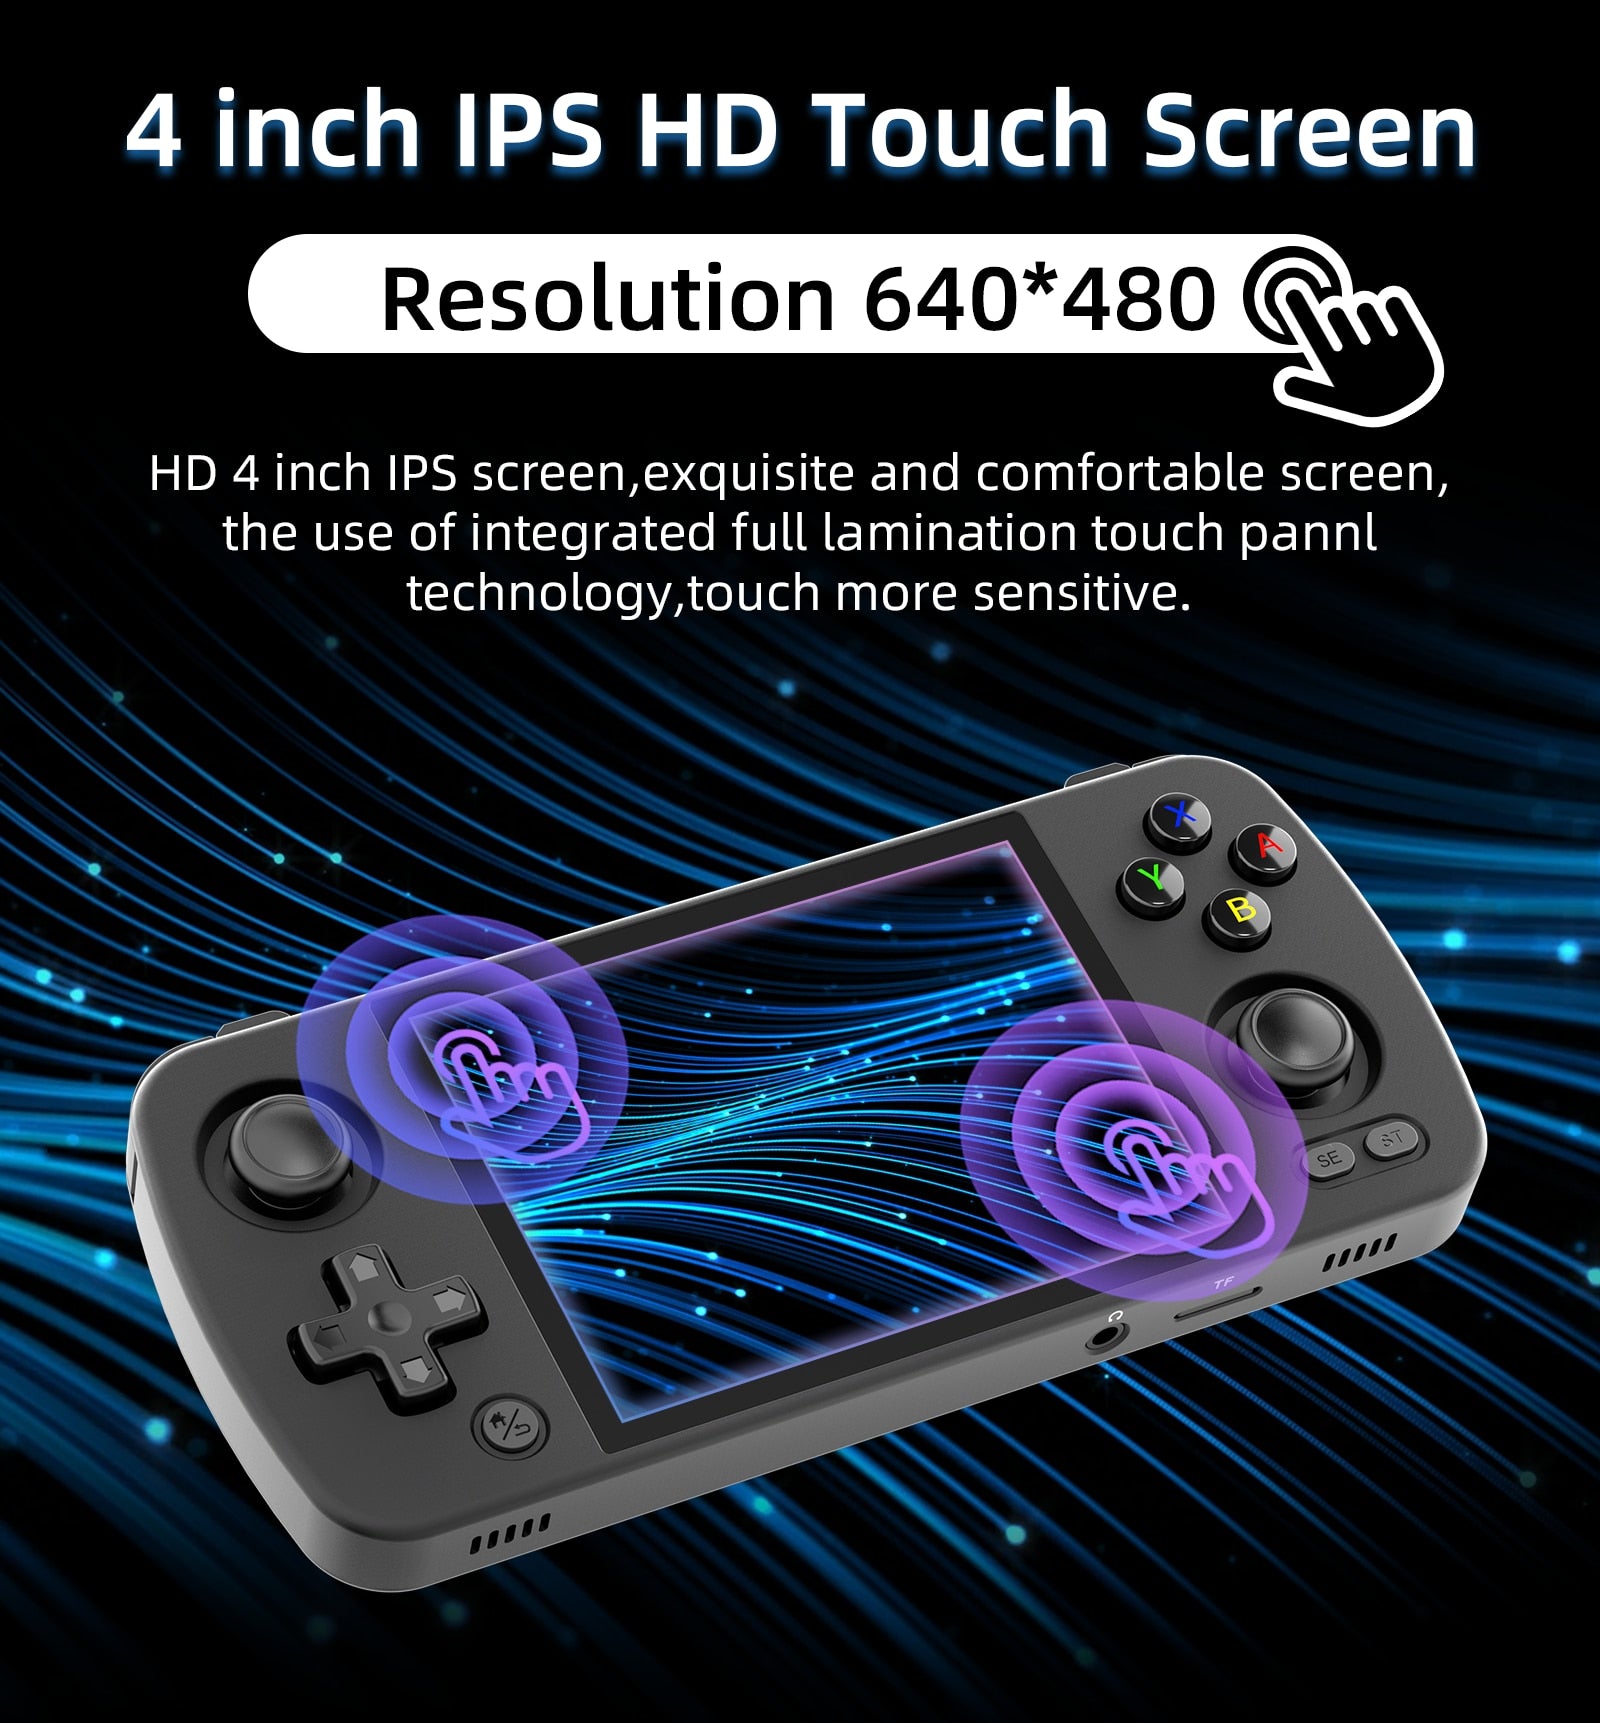 RG405M Retro Handheld Game Aluminum Alloy, Android 12 Built-in 128G TF Card  3172 Games,4 inch IPS Touch Screen with Game Front-end,RG405M Supports OTA